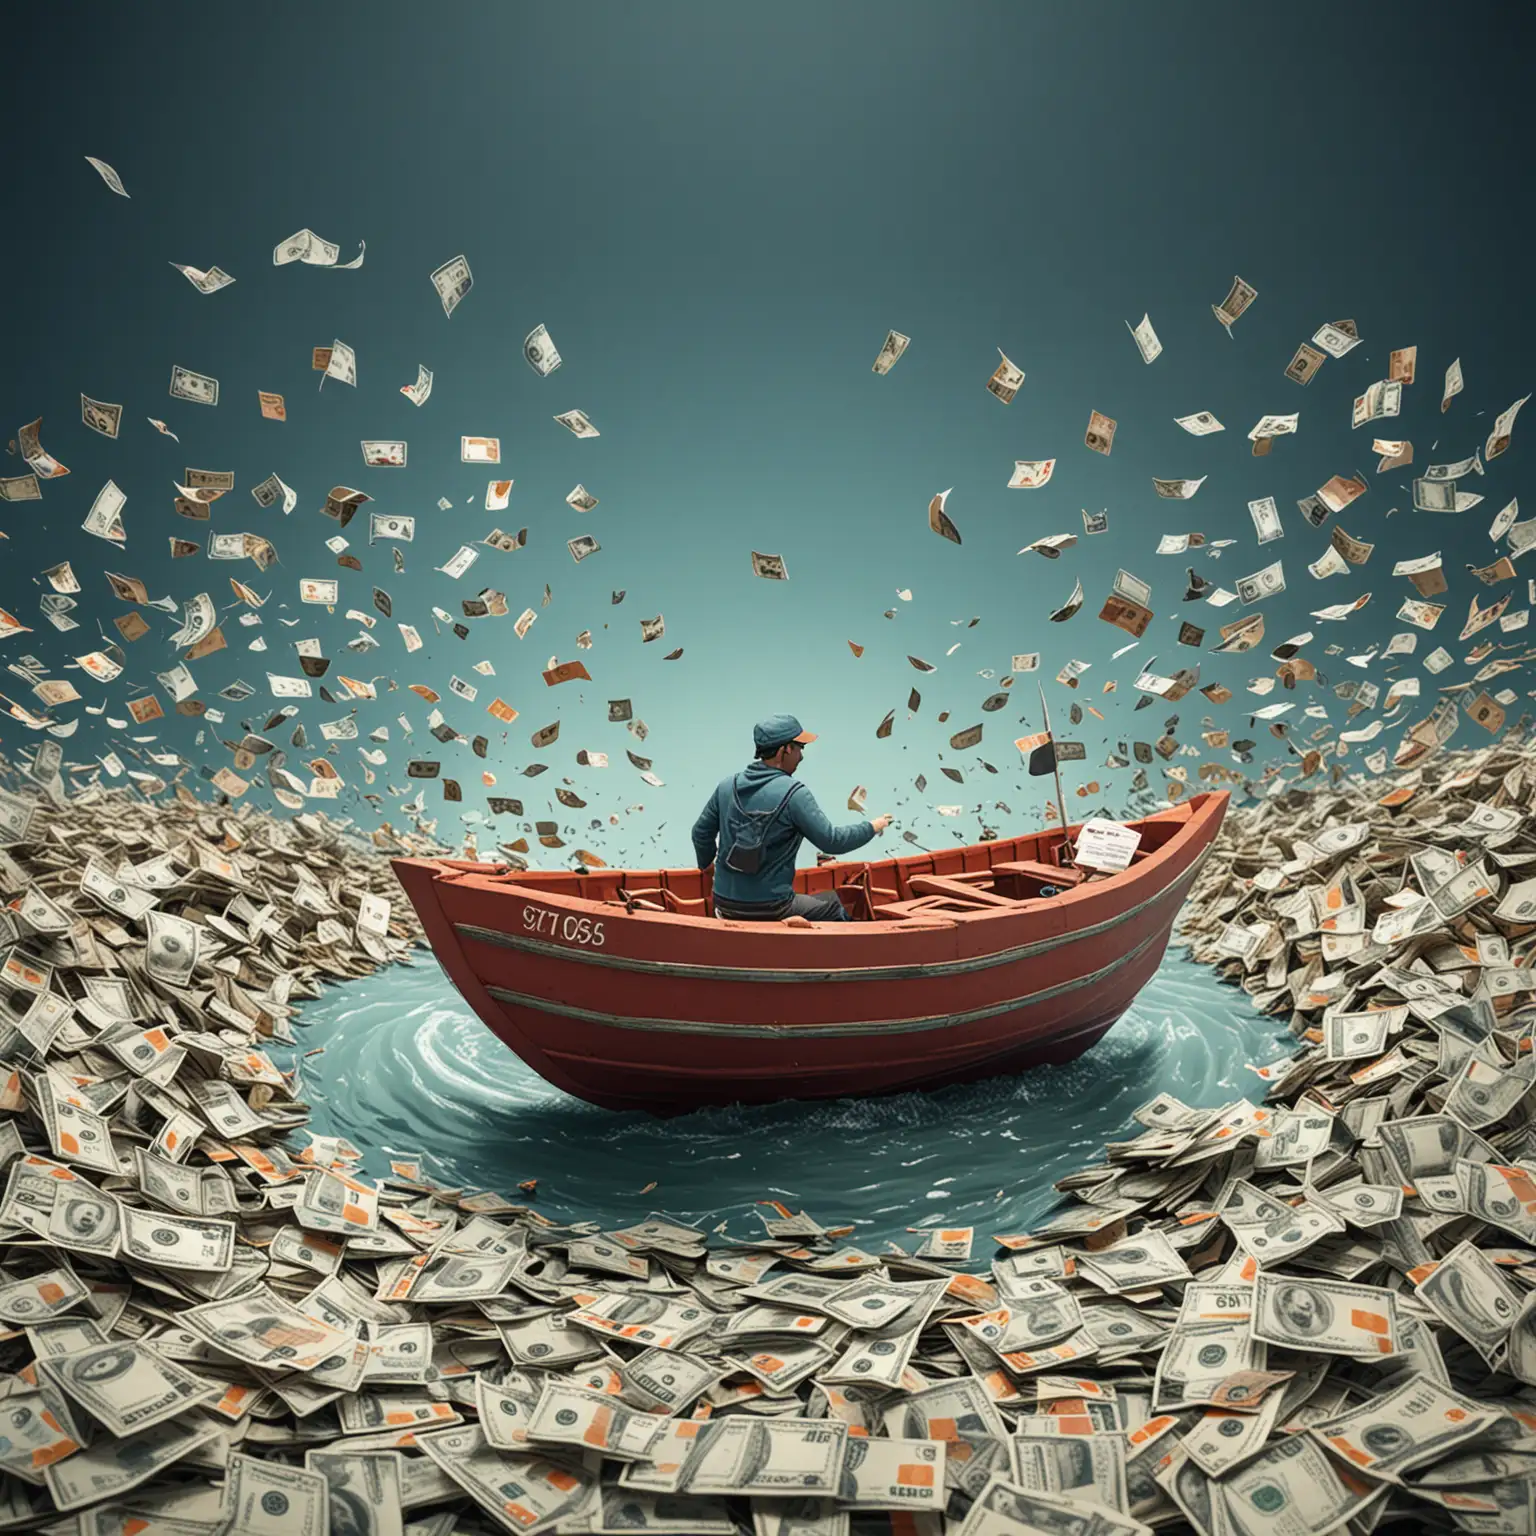 A playful image featuring a small boat navigating through a sea of bank accounts and cross-border payments, portraying your company as the guide through the complexities of payments.